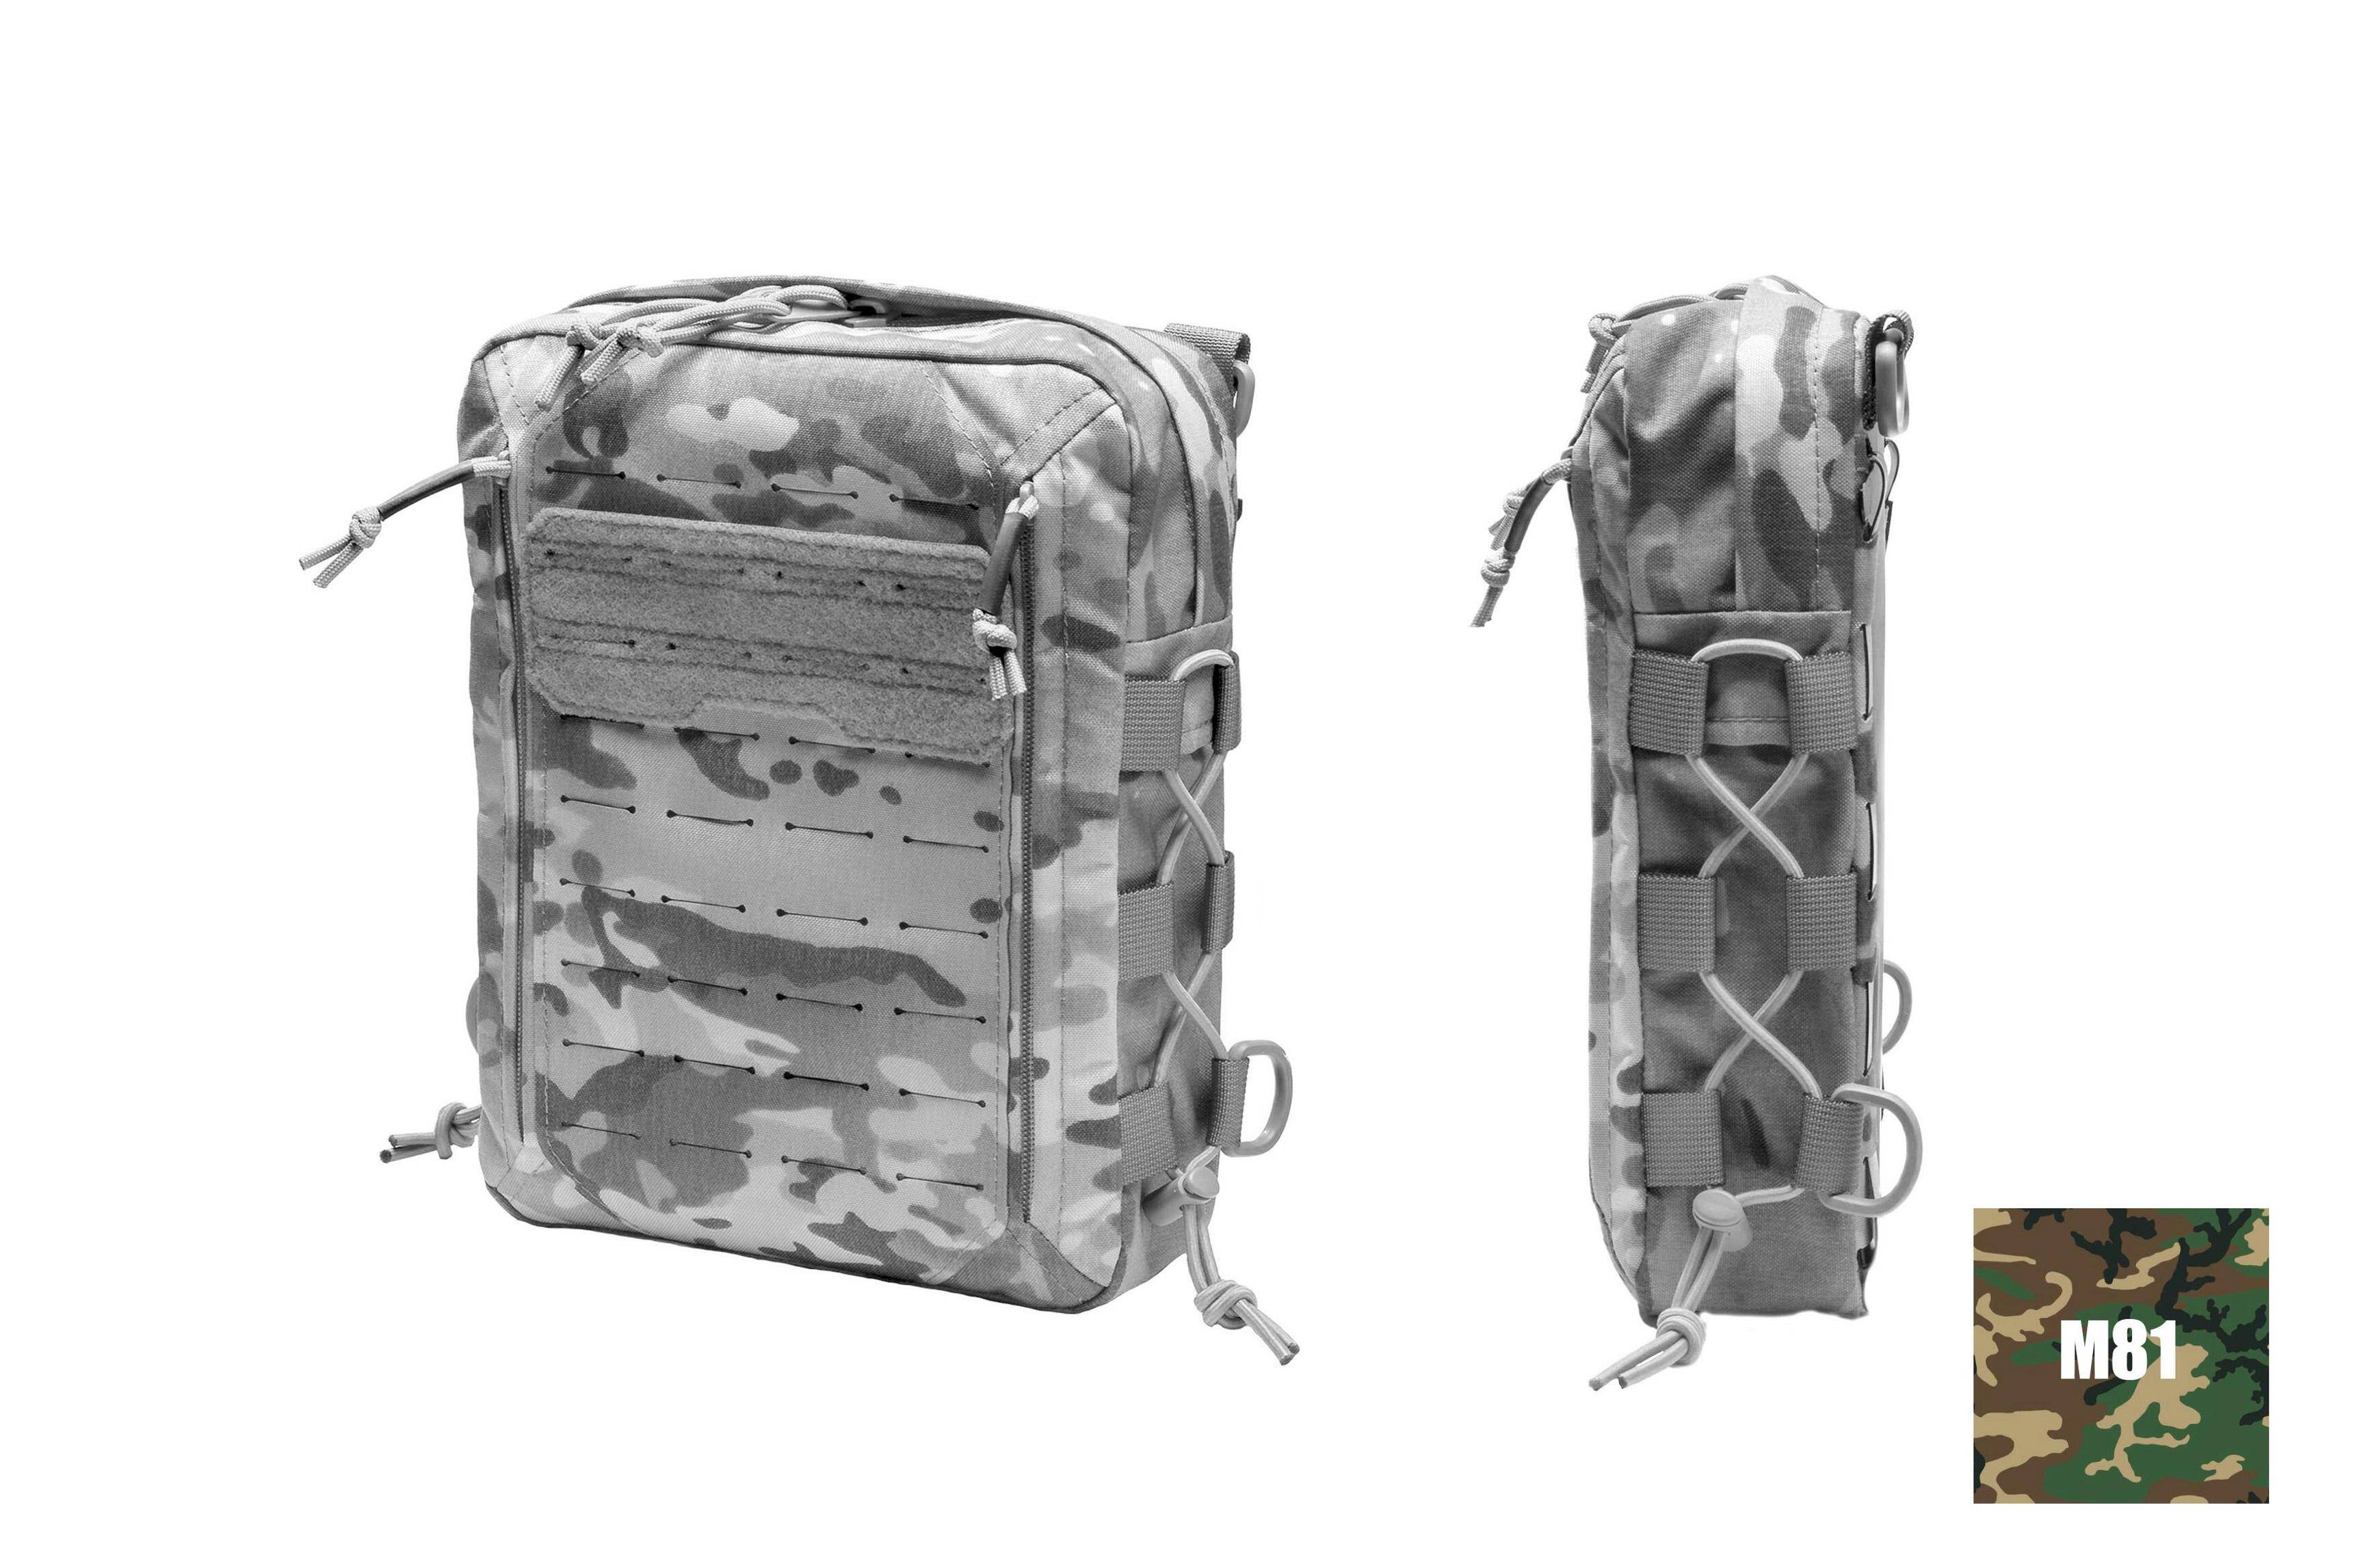 TG-HP Vest Pack H1 SMALL Woodland M81